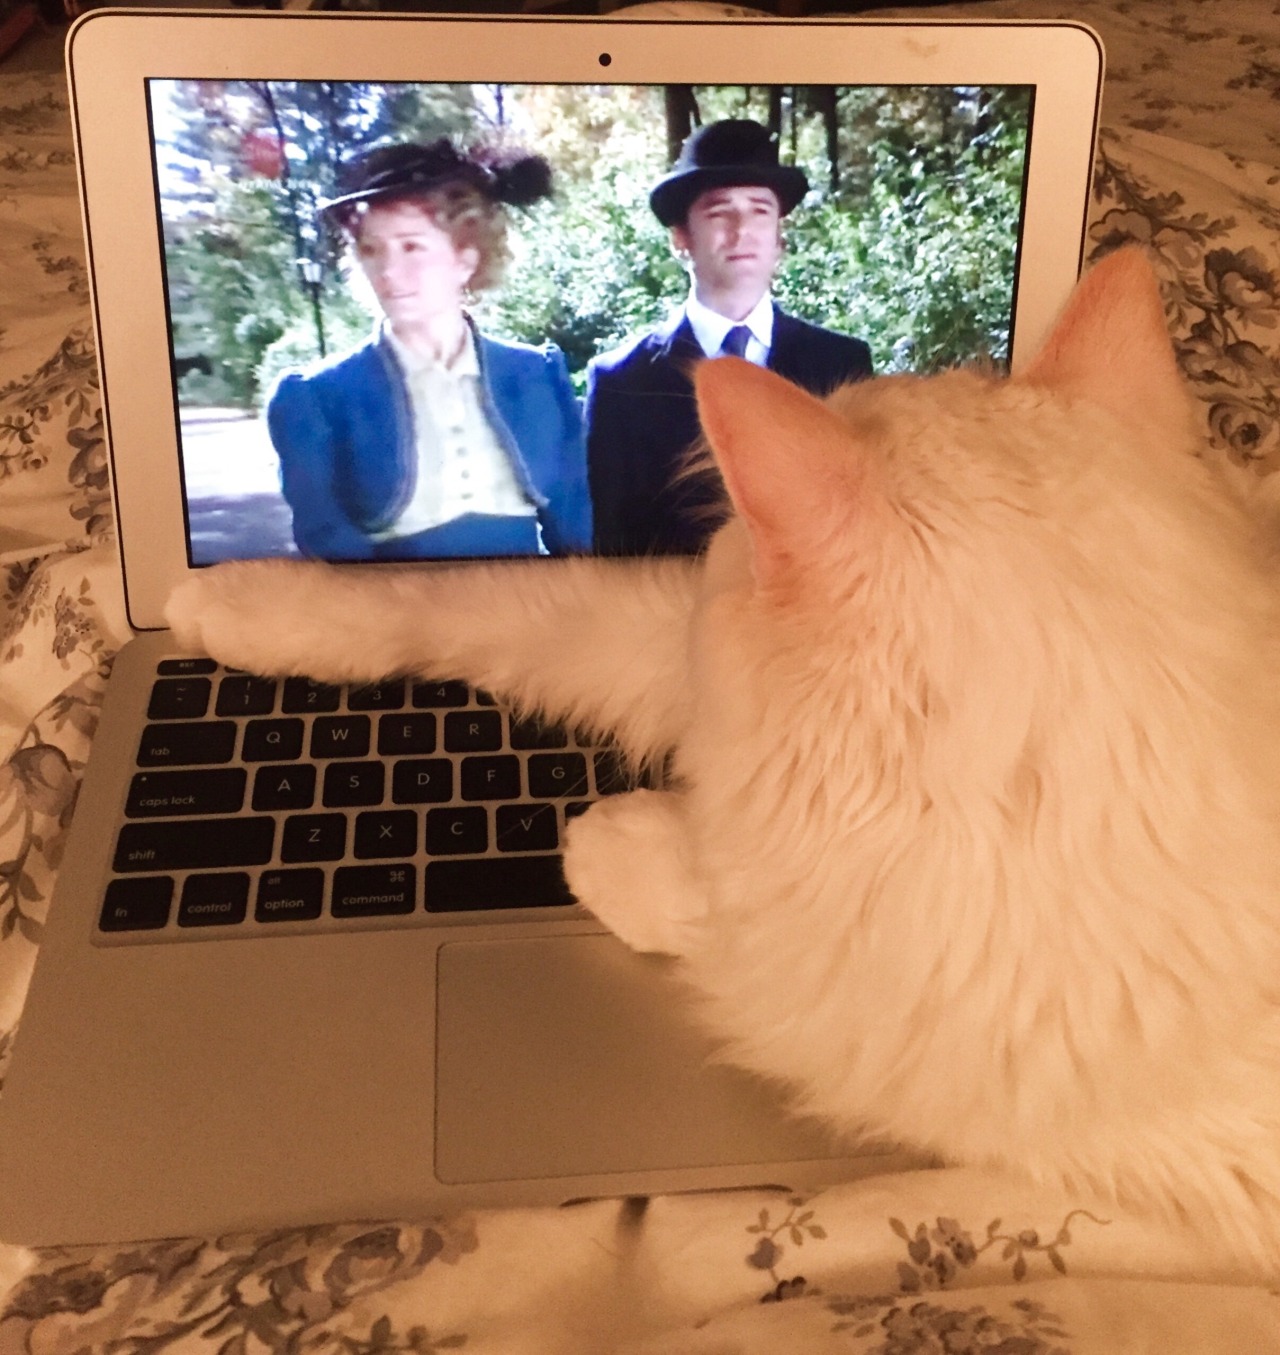 My cat really likes watching Murdoch Mysteries 😂